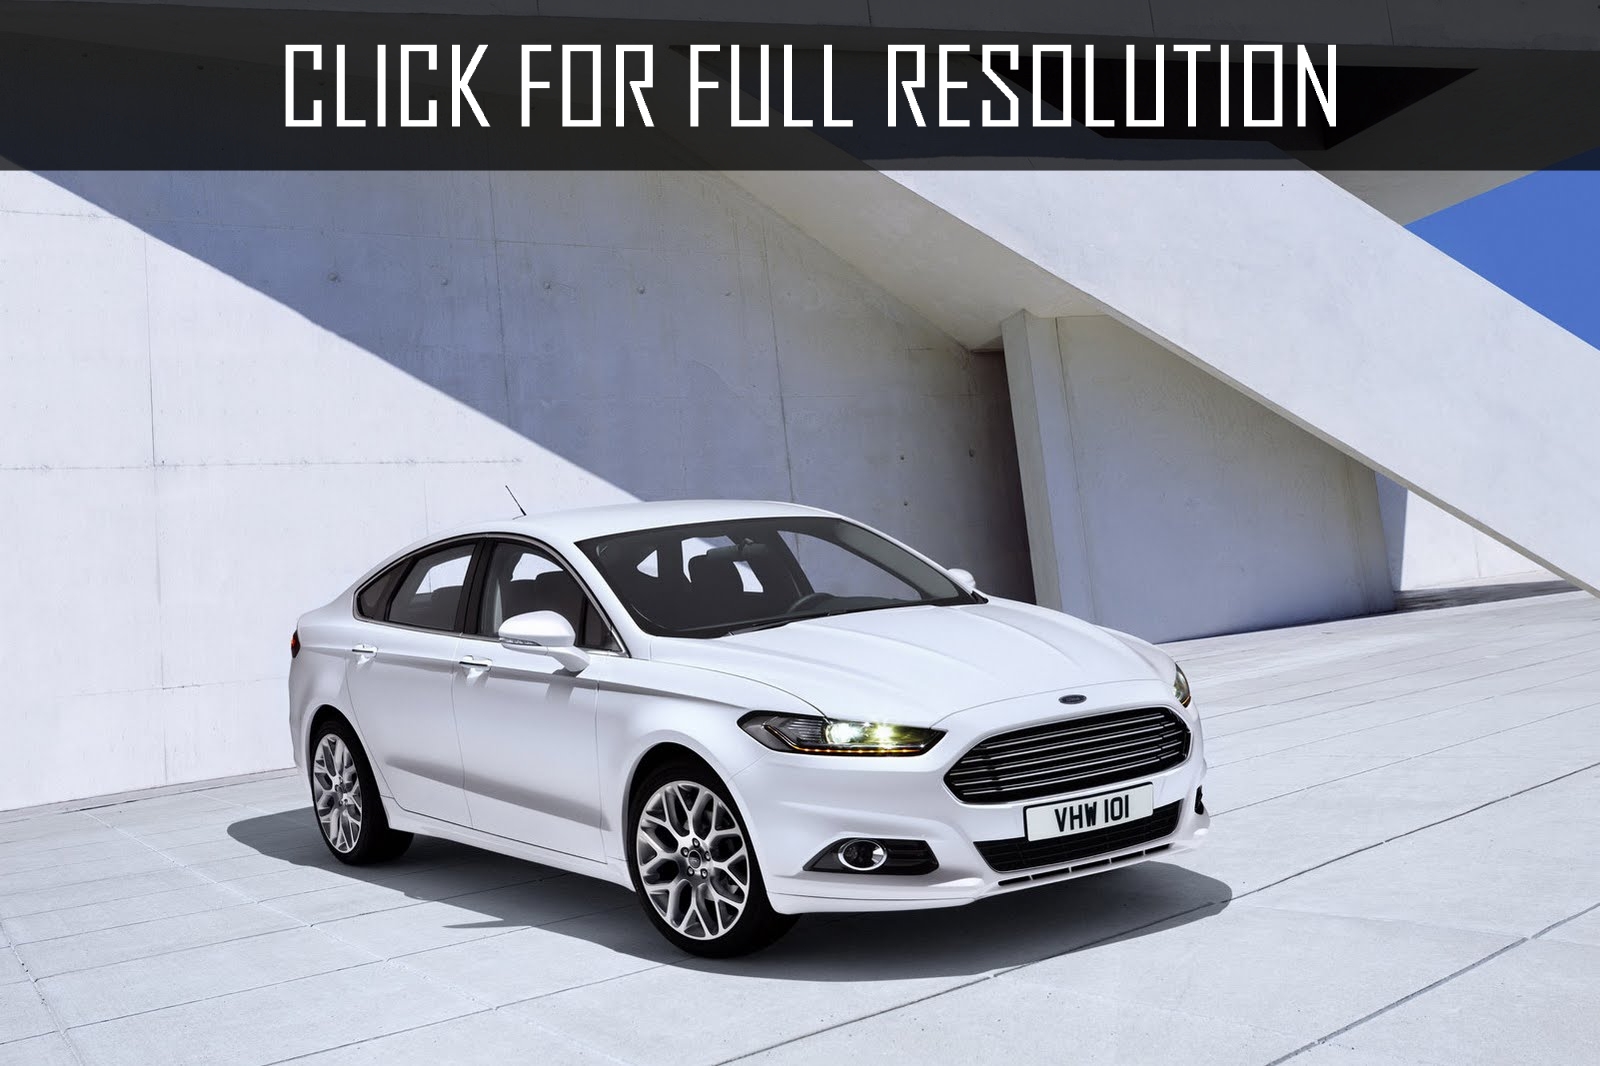 Meetbaar Marine Pat 2014 Ford Mondeo - news, reviews, msrp, ratings with amazing images